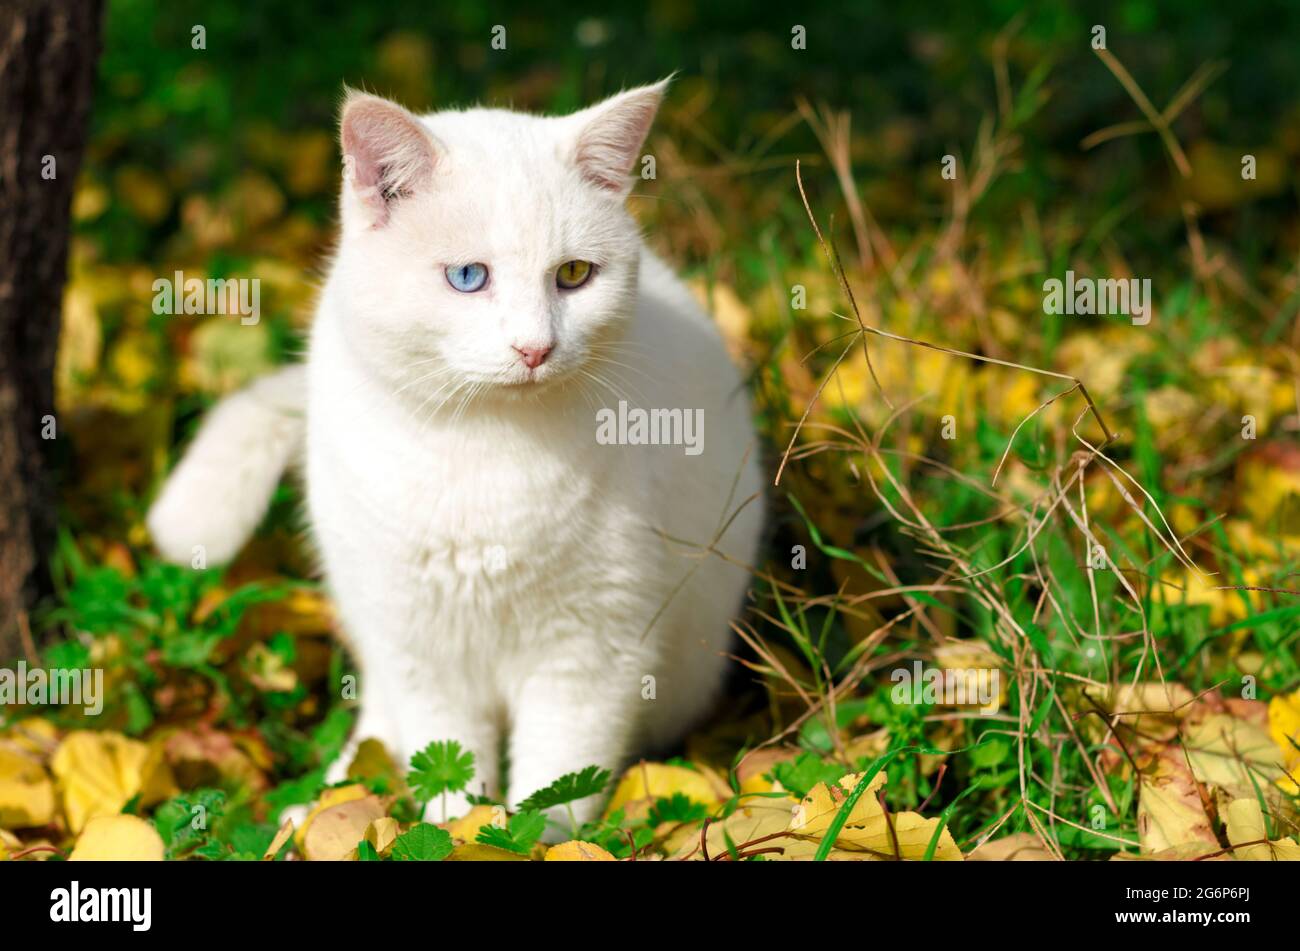 Front view of a white cat sitting outdoors in grass with autumn leaves Stock Photo